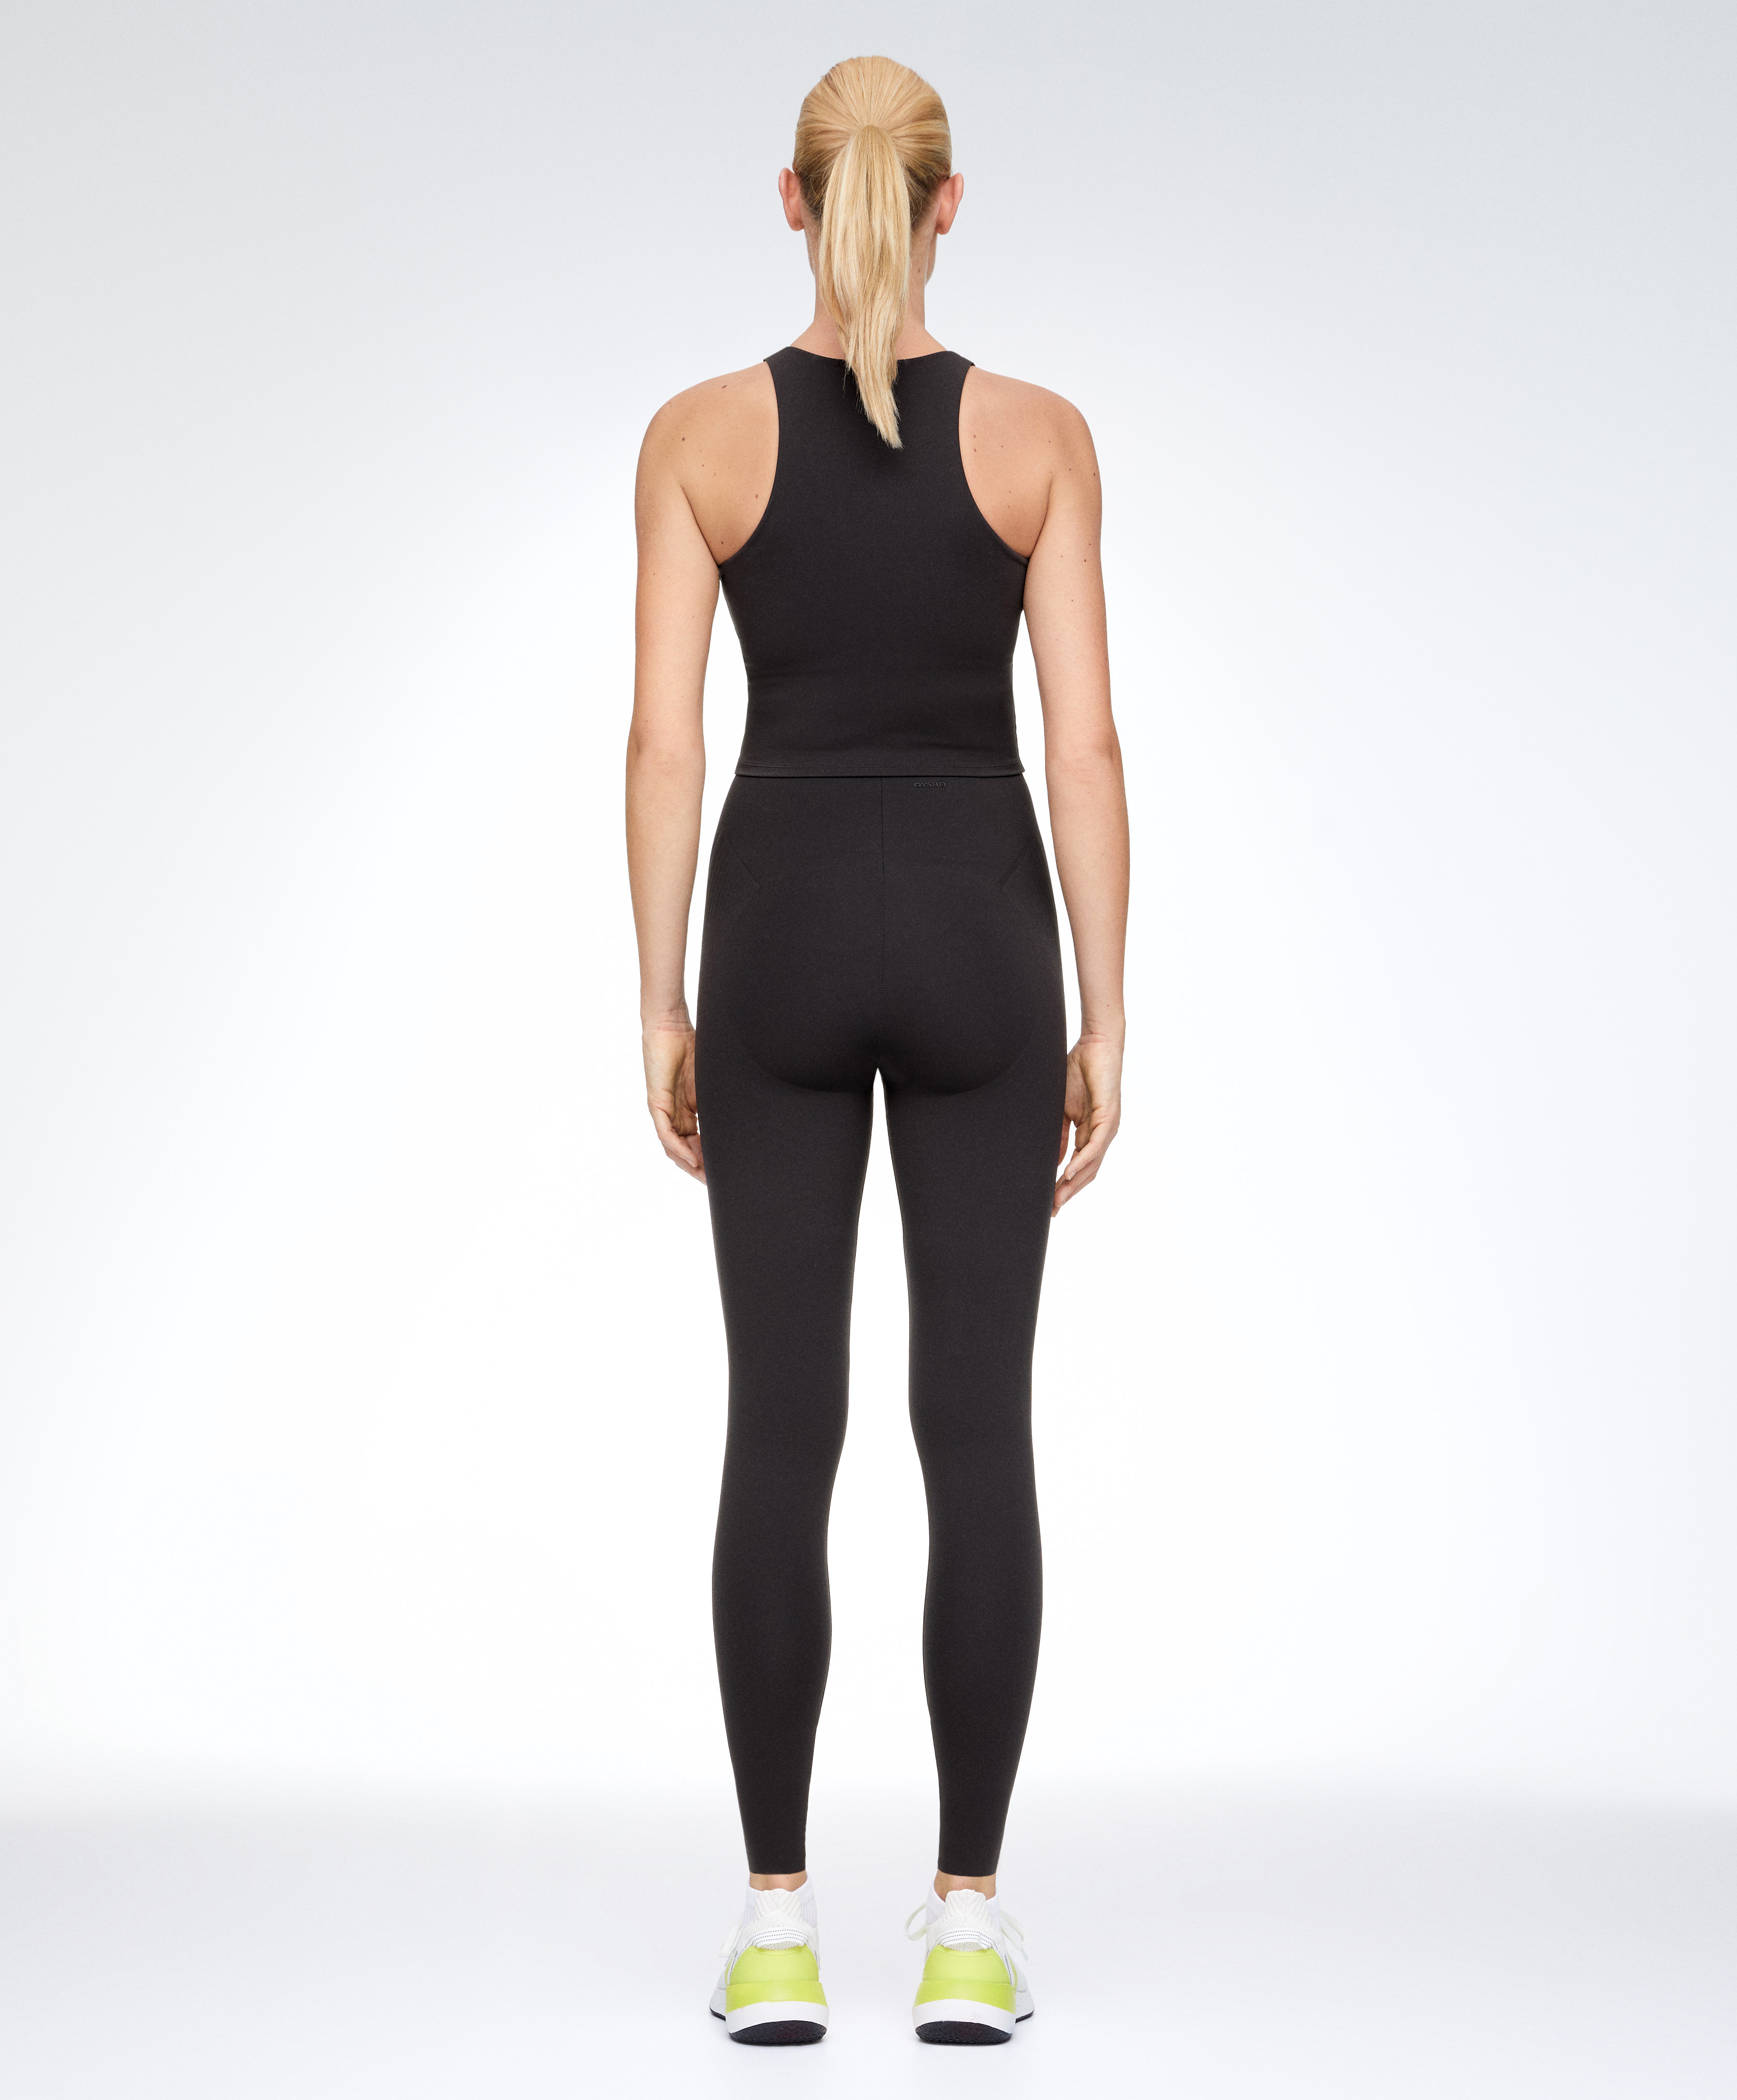 Raise Up compressive super-high-rise ankle-length 65cm leggings with zip